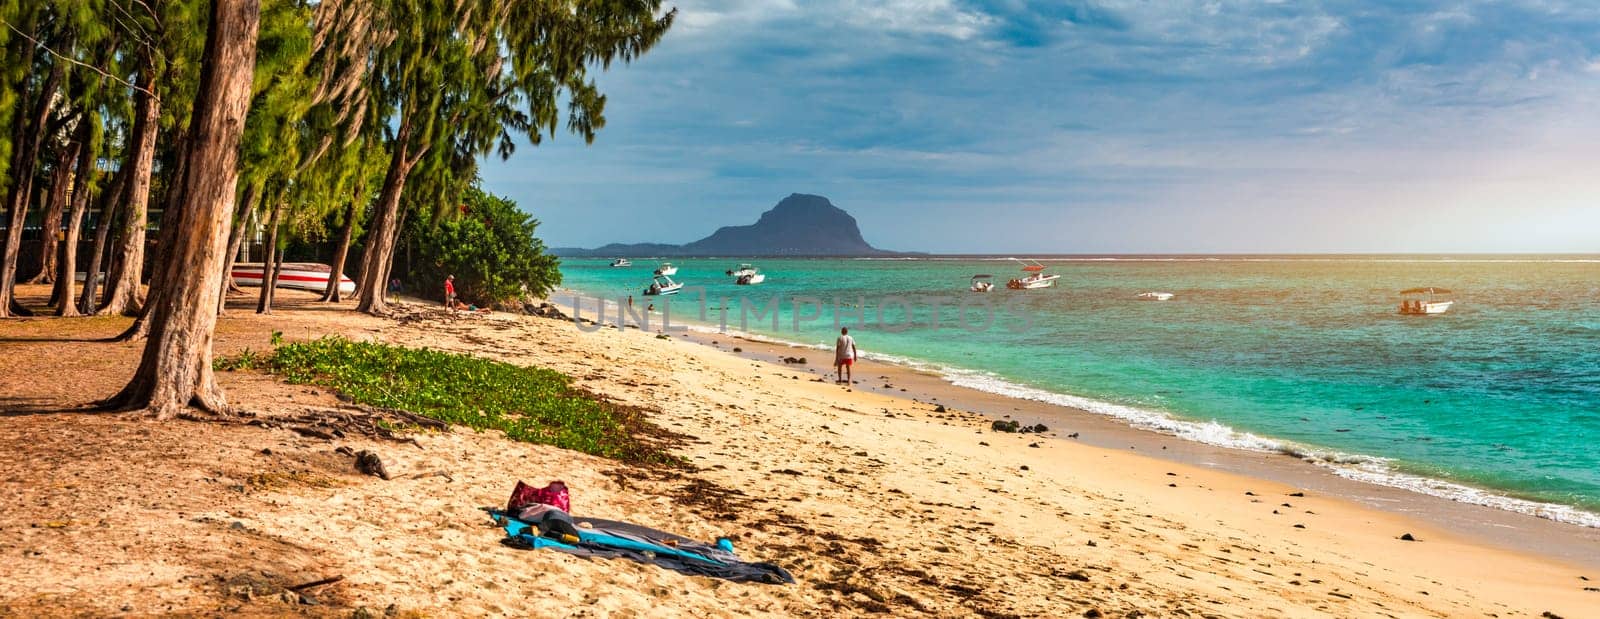 Beach of Flic en Flac with beautiful peaks in the background, Mauritius. Beautiful Mauritius Island with gorgeous beach Flic en Flac. Flic en Flac Beach, Mauritius Island.